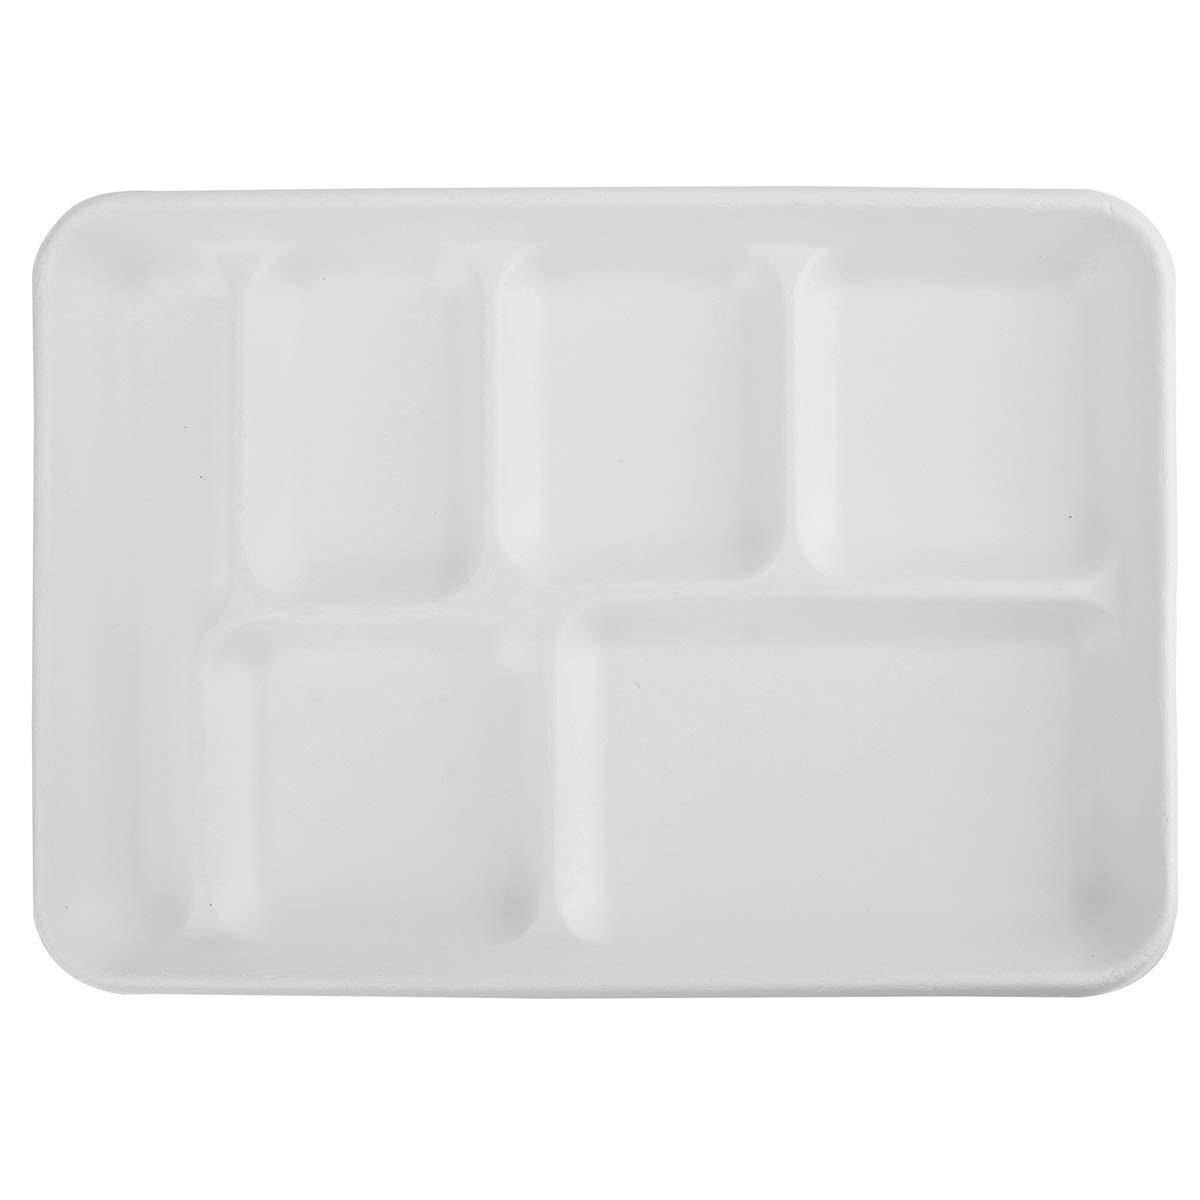 Bekith 60 Pack 6-Compartment Disposable Paper Plate, 100% Compostable Bagasse School Lunch Tray, Heavy-Duty Sectional Plates Eco-Friendly Made of Sugar Cane Fibers